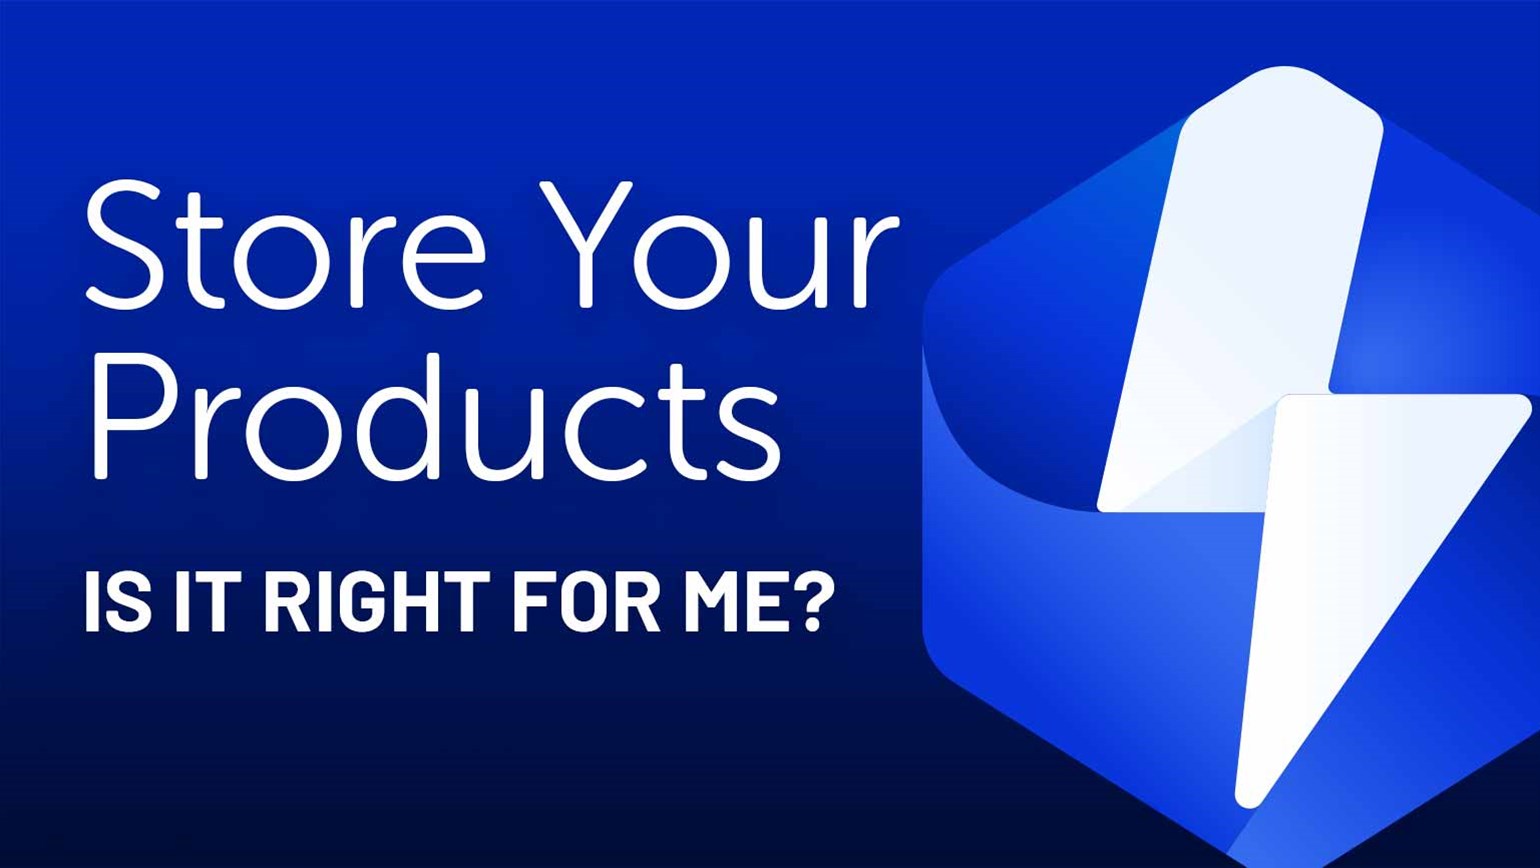 Store Your Products: Is it right for me?